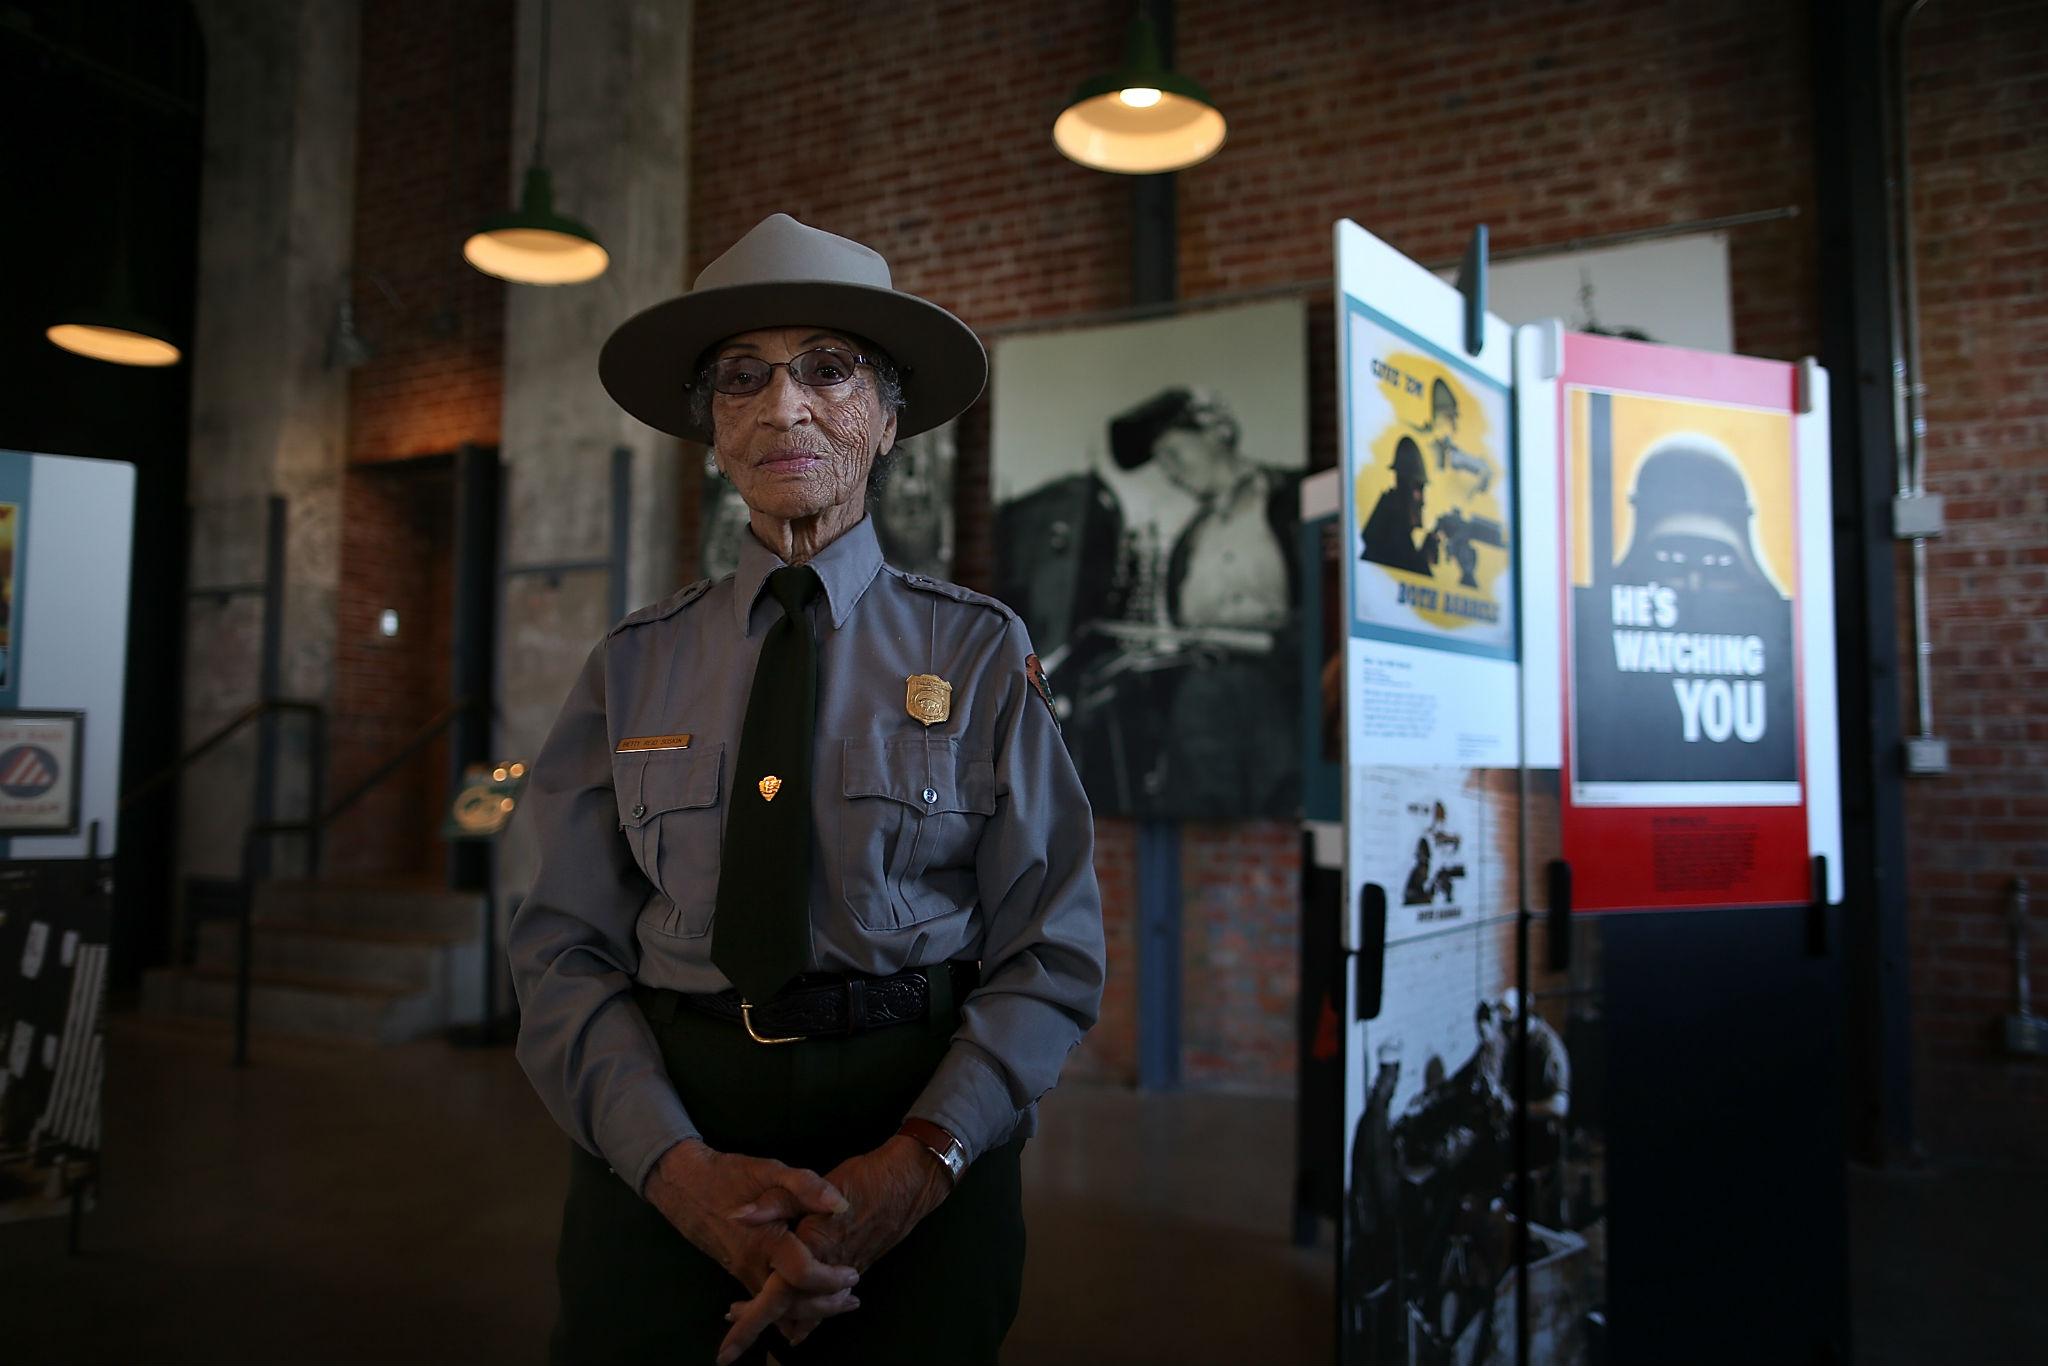 Betty Reid Soskin works as a ranger and tour guide at the Rosie the Riveter WWII Home Front National Historical Park in Richmond, California